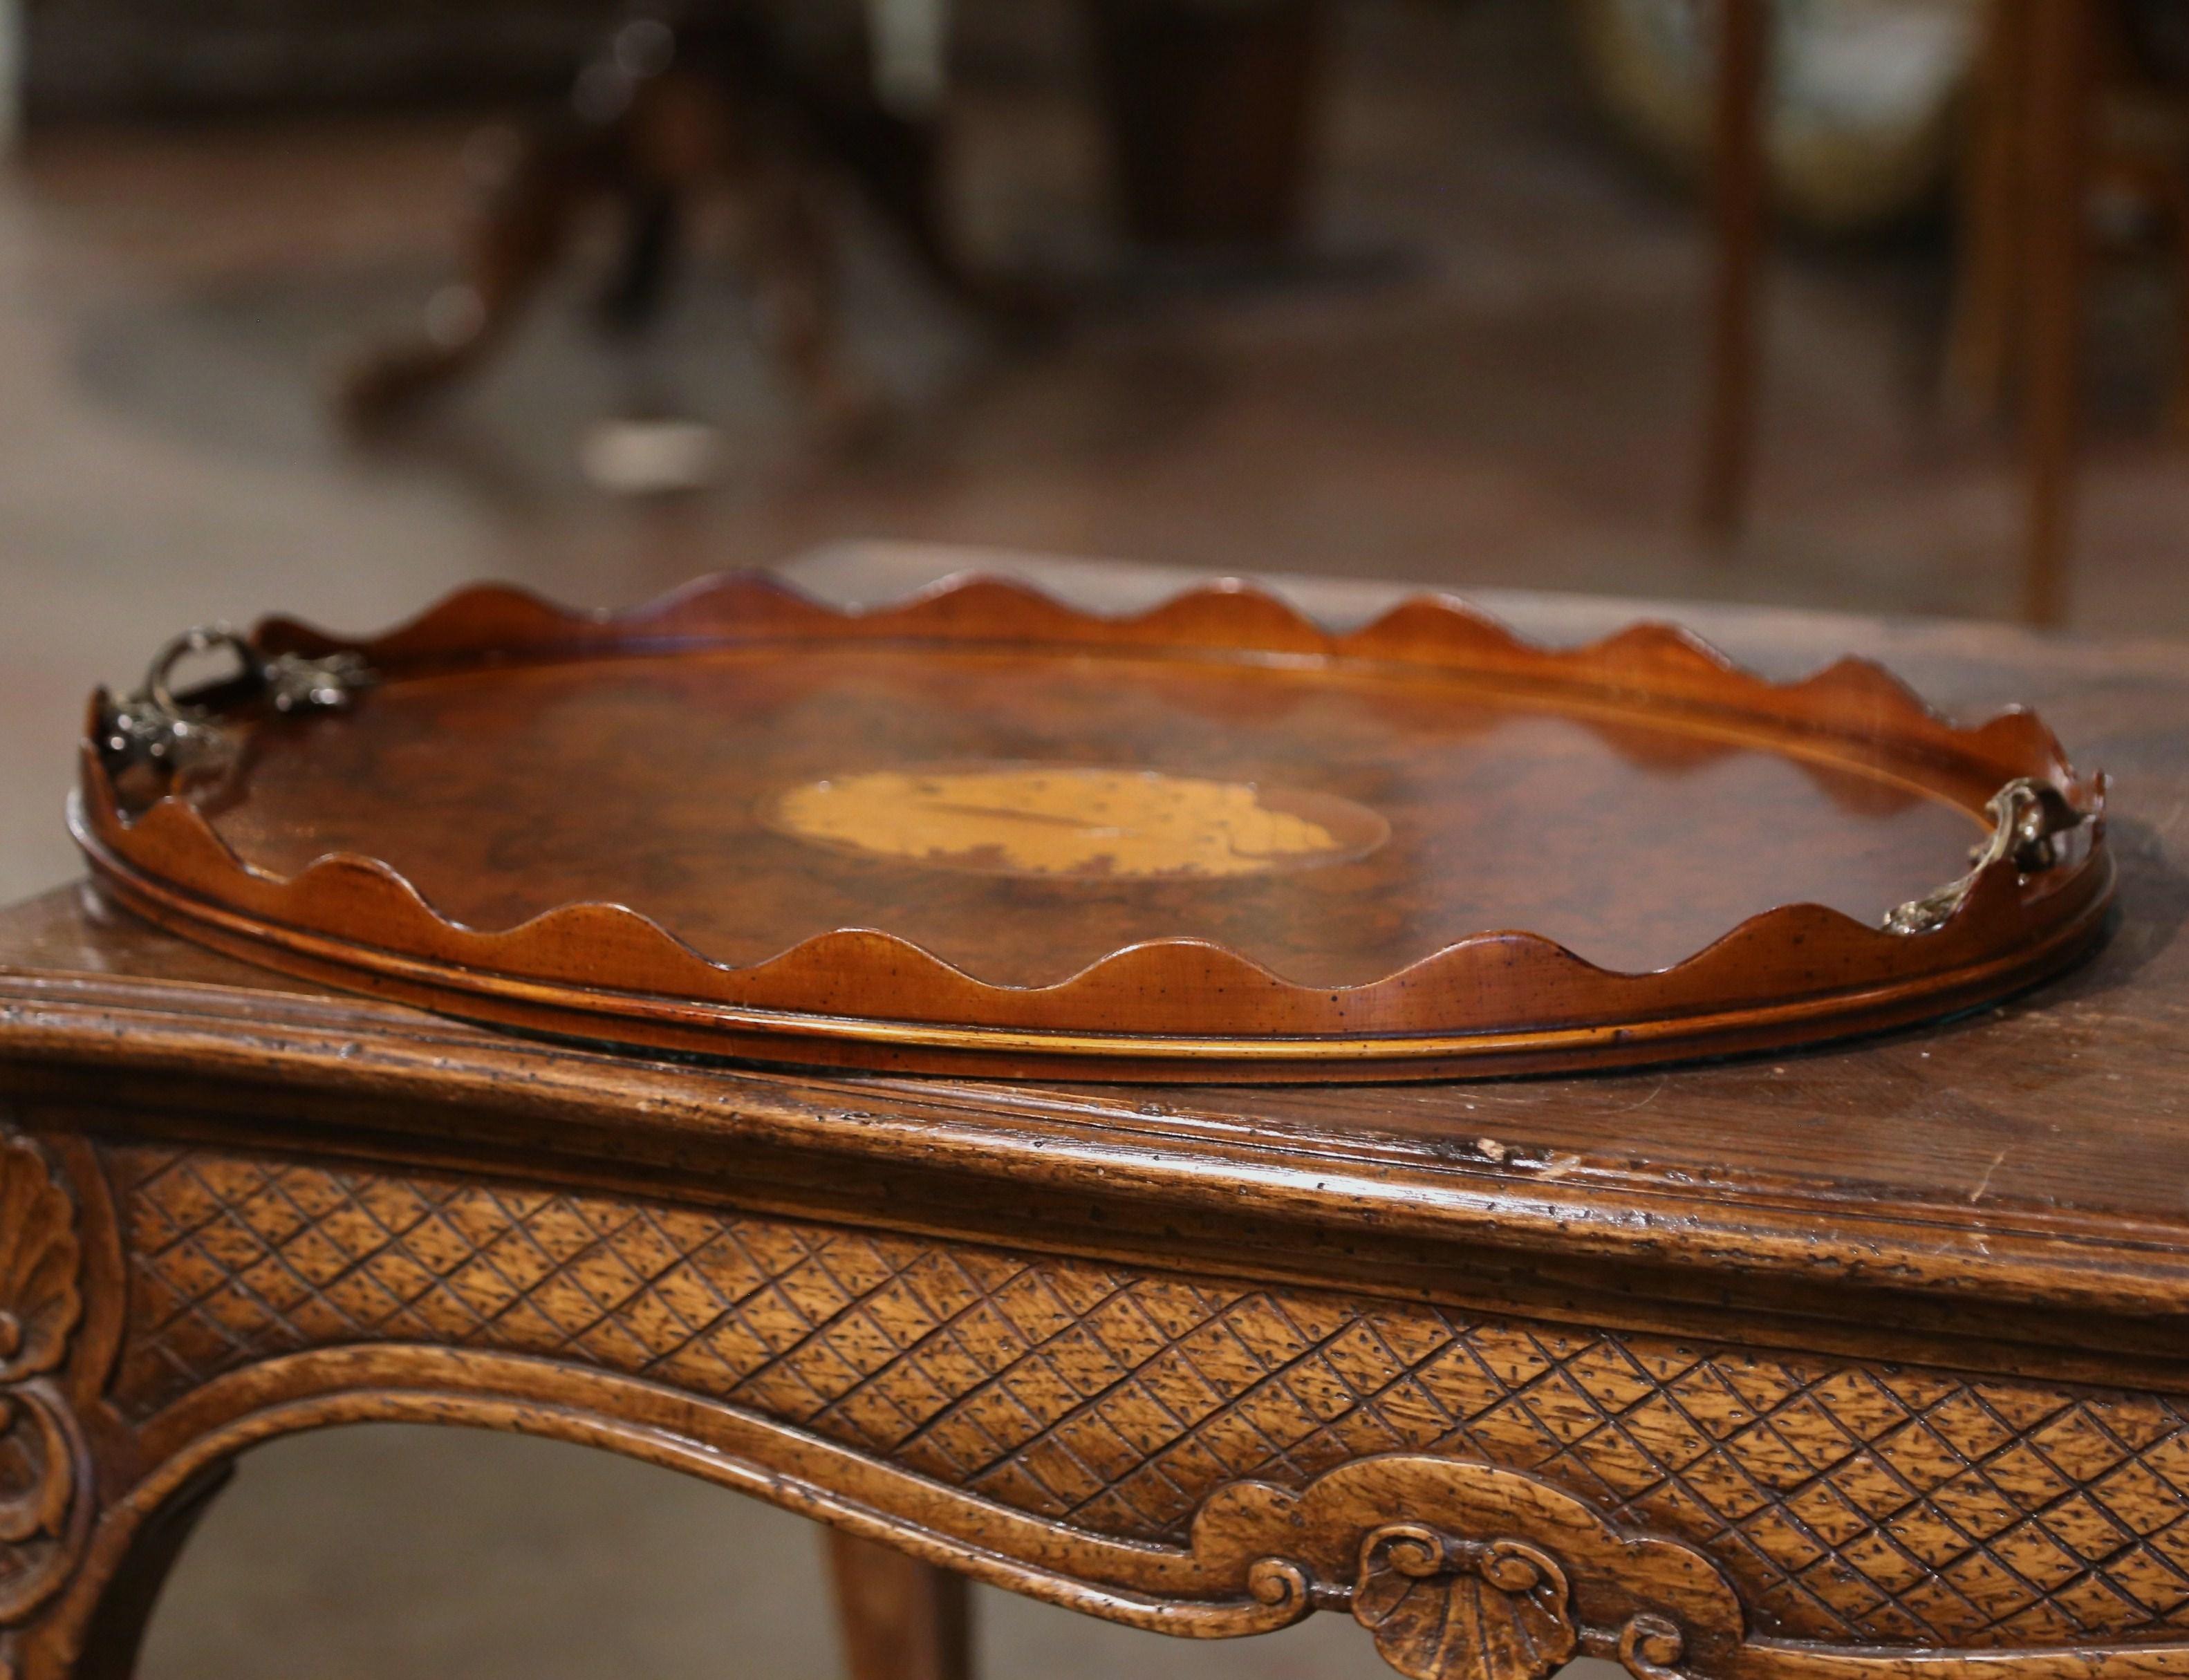 Embellish a coffee table with this elegant antique tray table. Crafted in England, circa 1890 and built of burl walnut, the oval plateau features a raised scalloped edge around the scalloped periphery, and is dressed with two intricate bronze